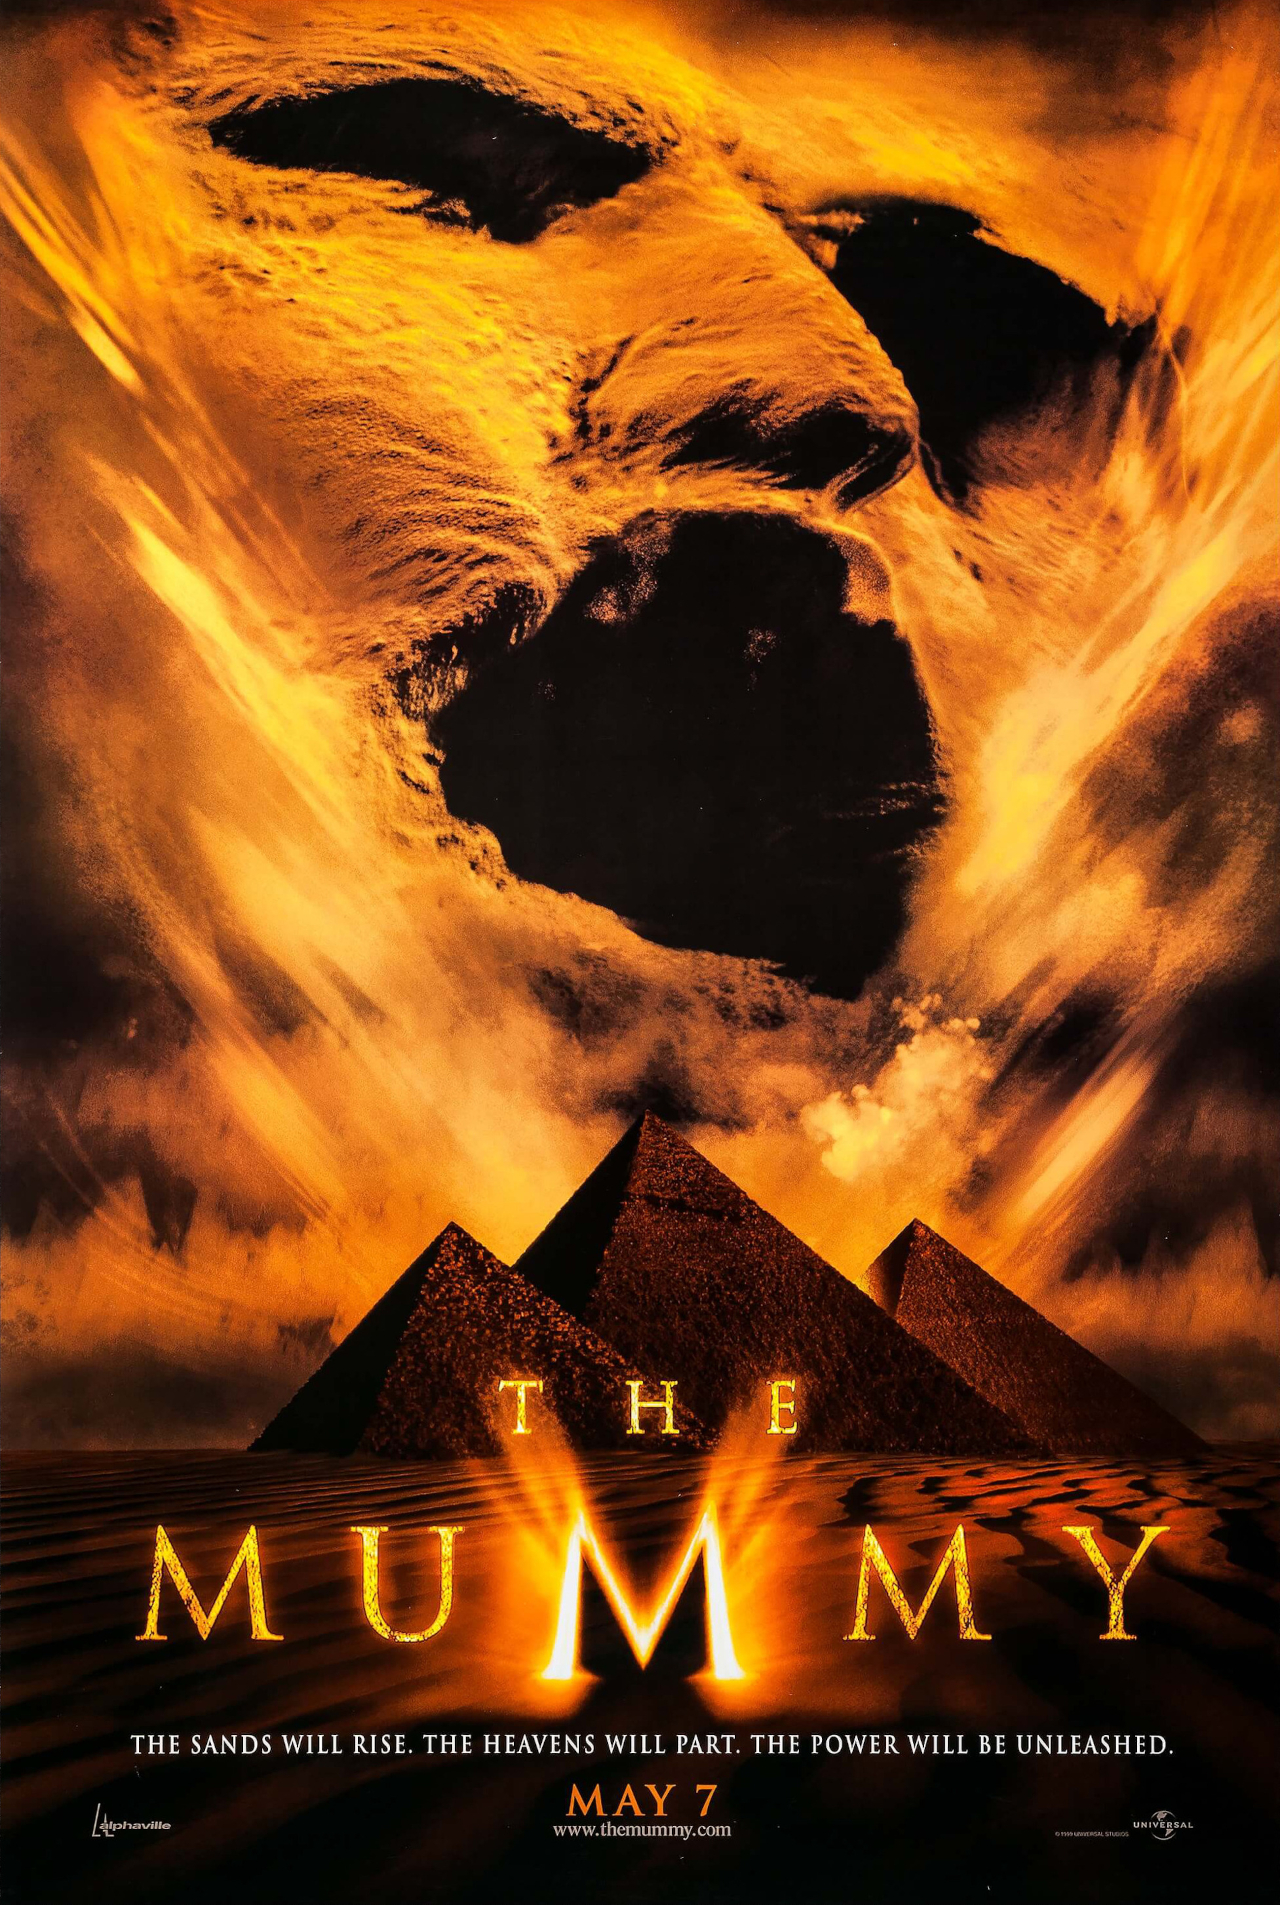 The Mummy's 1999 theatrical poster.